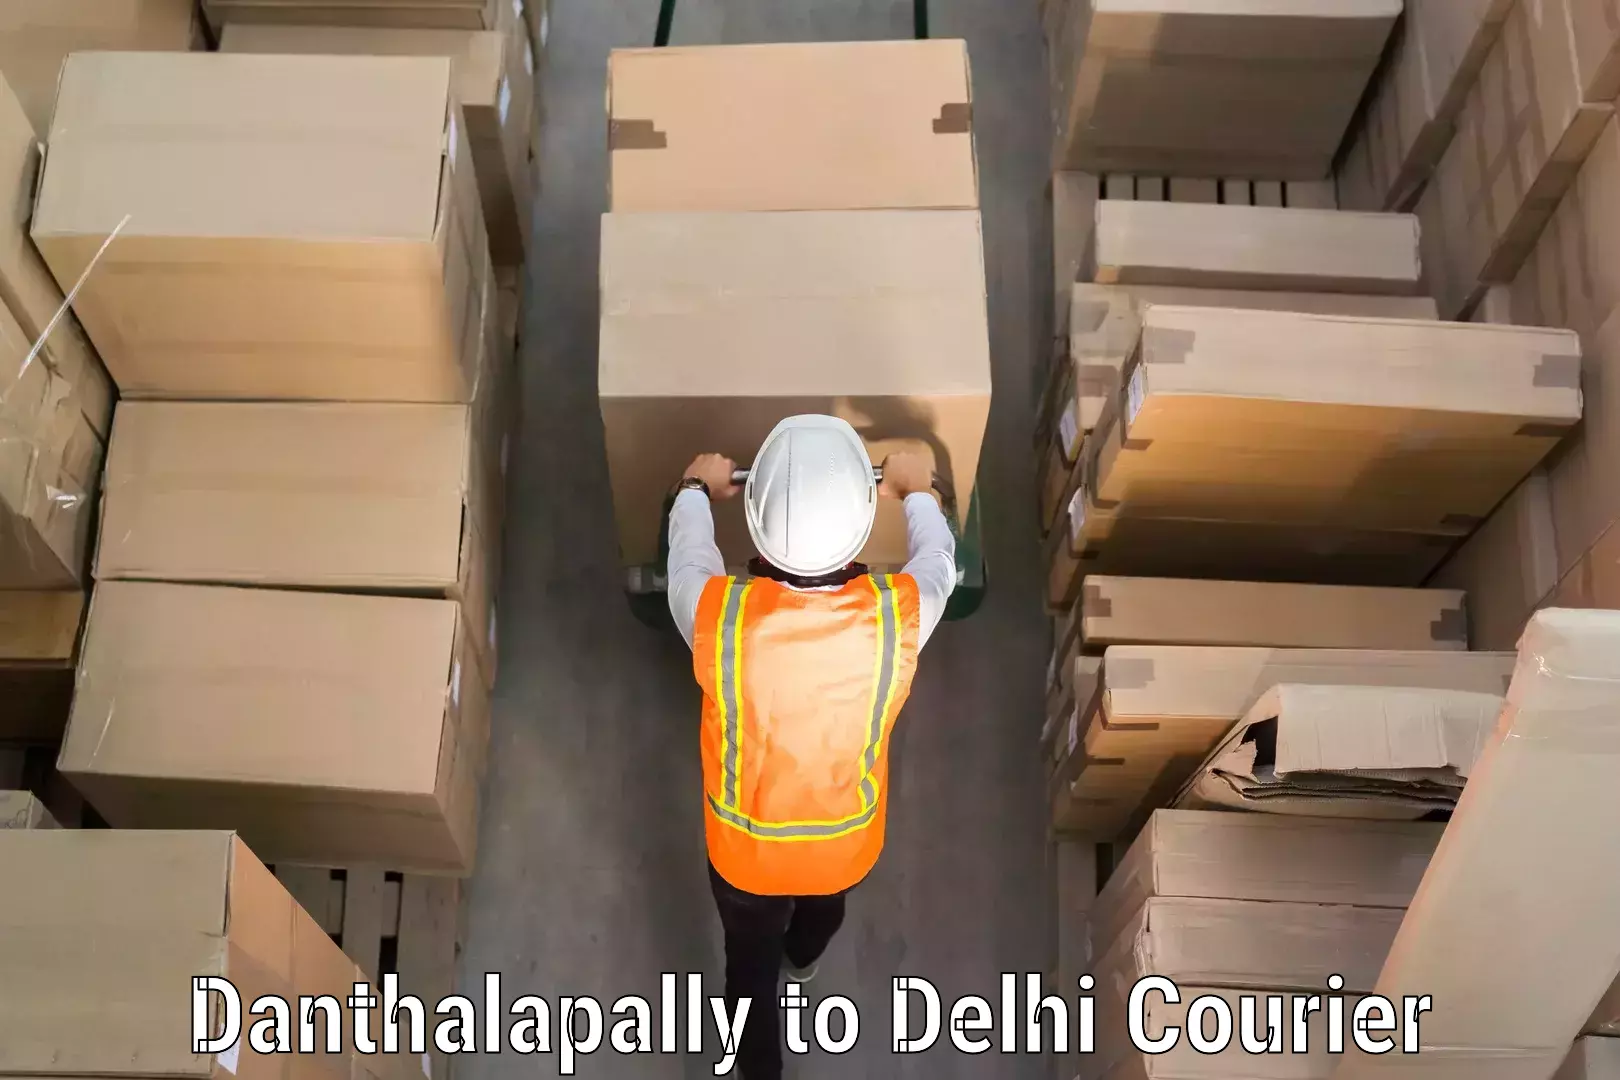 Baggage delivery technology Danthalapally to Delhi